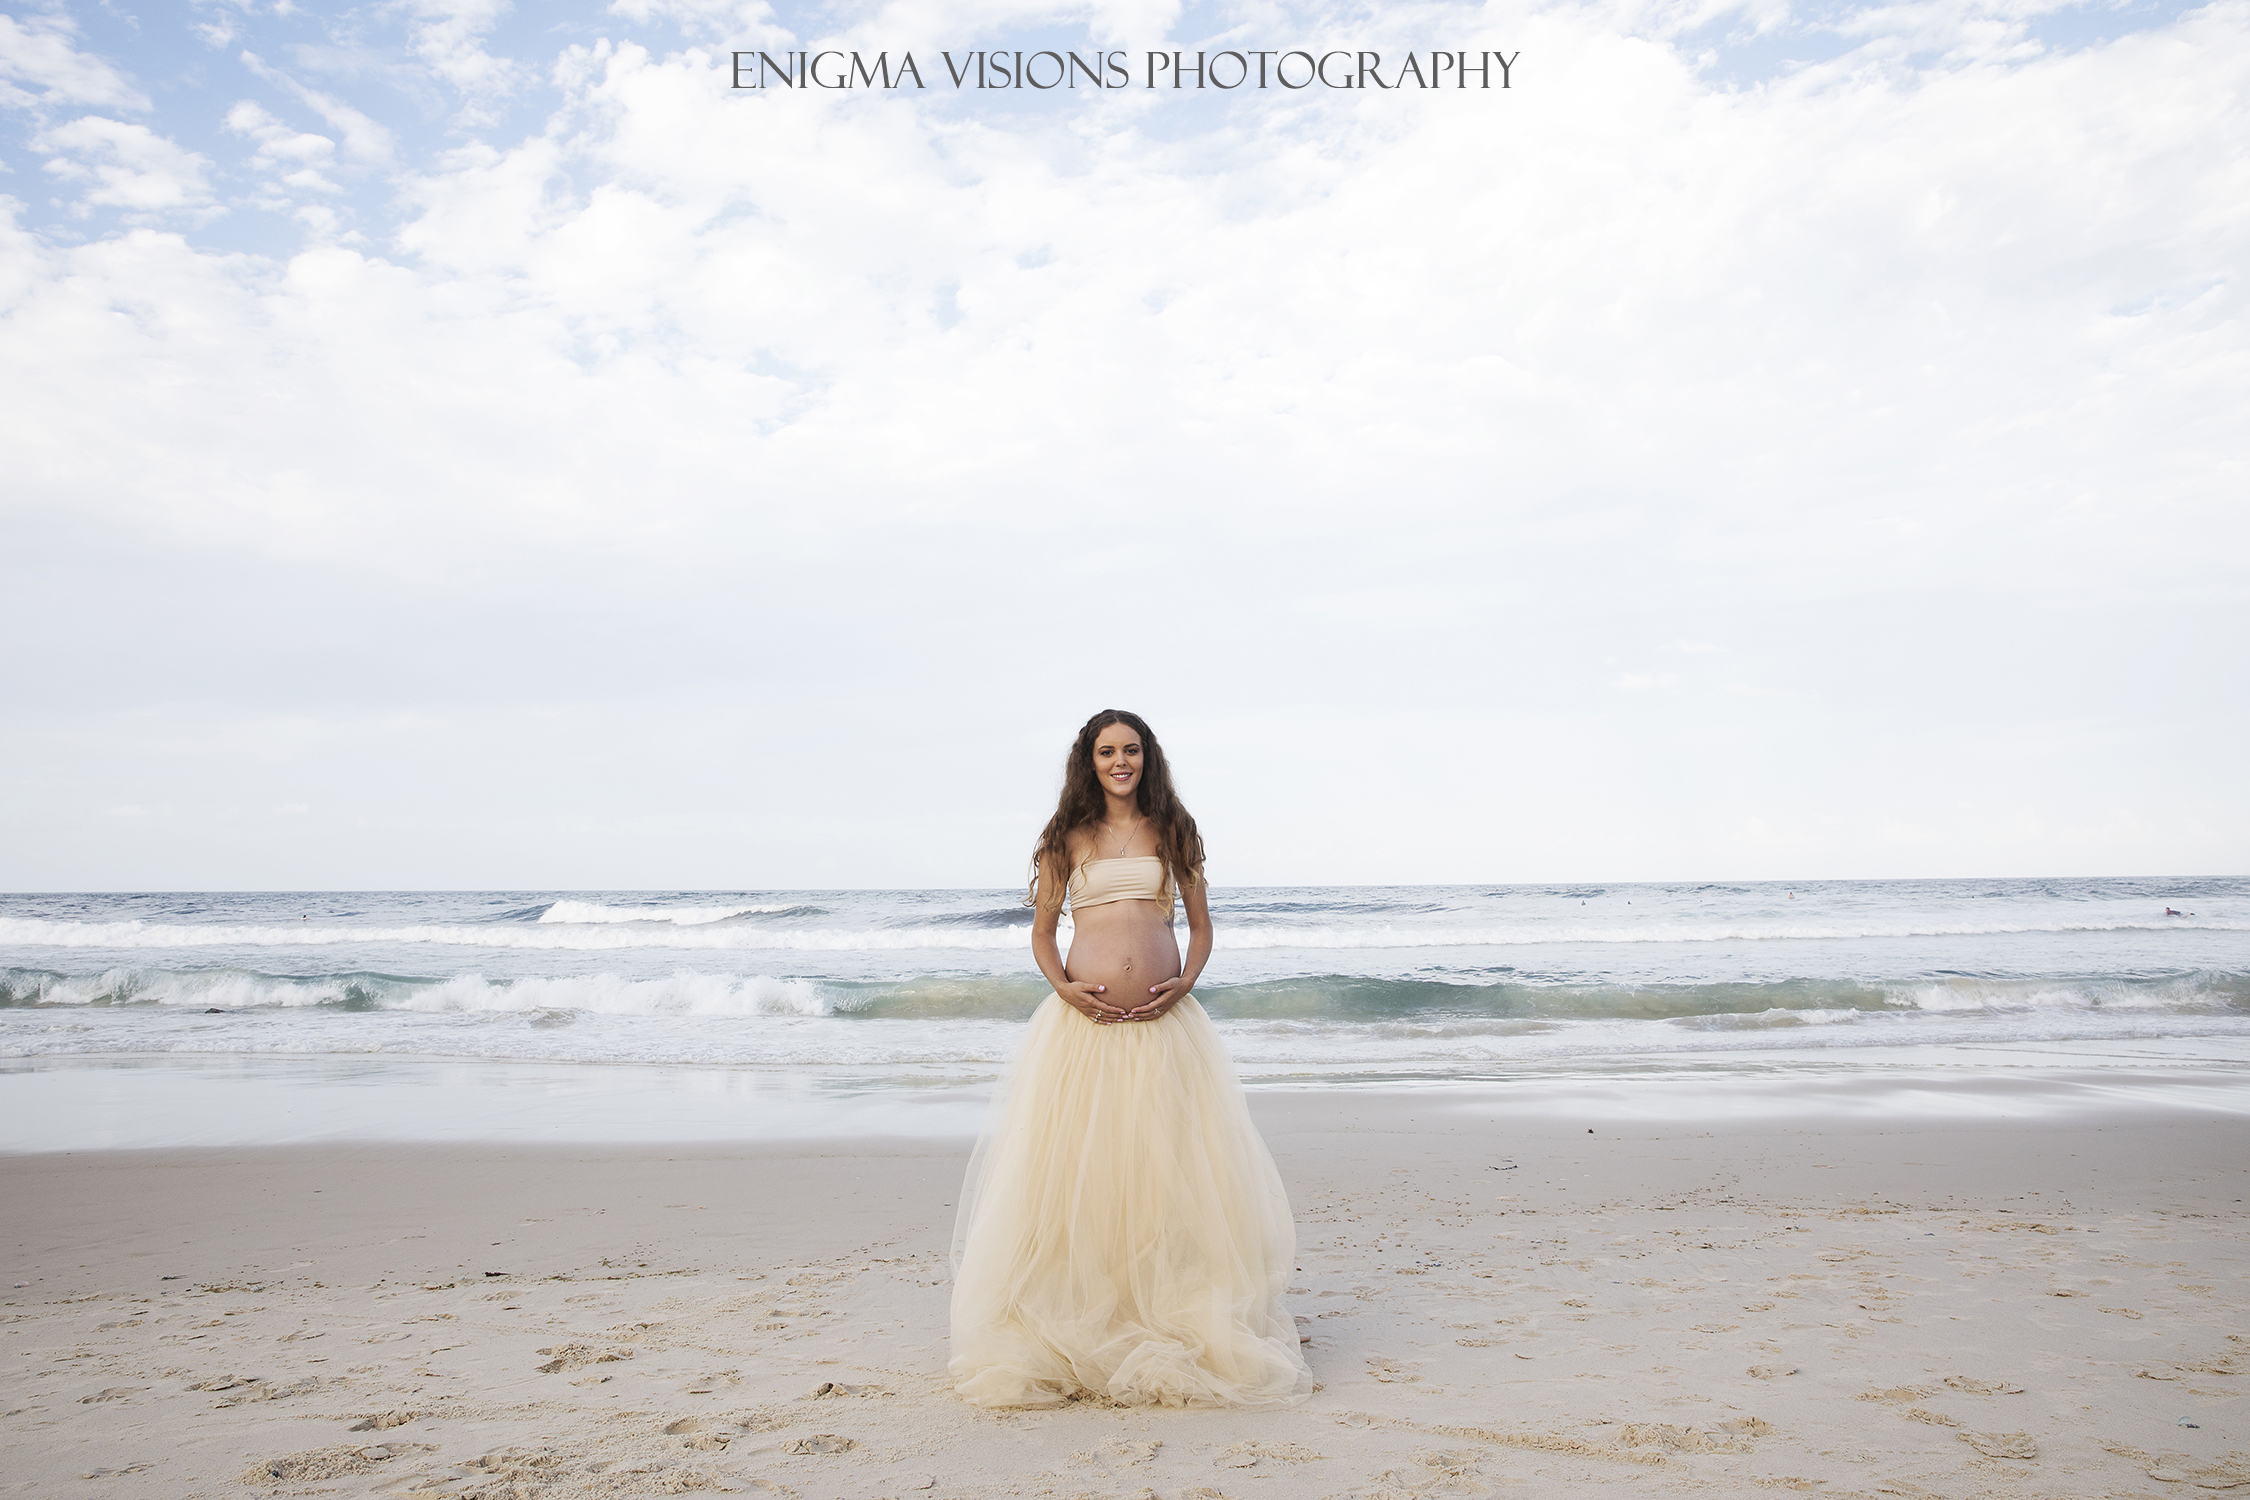 Enigma_Visions_Photography_Maternity_Mahlea021.jpg